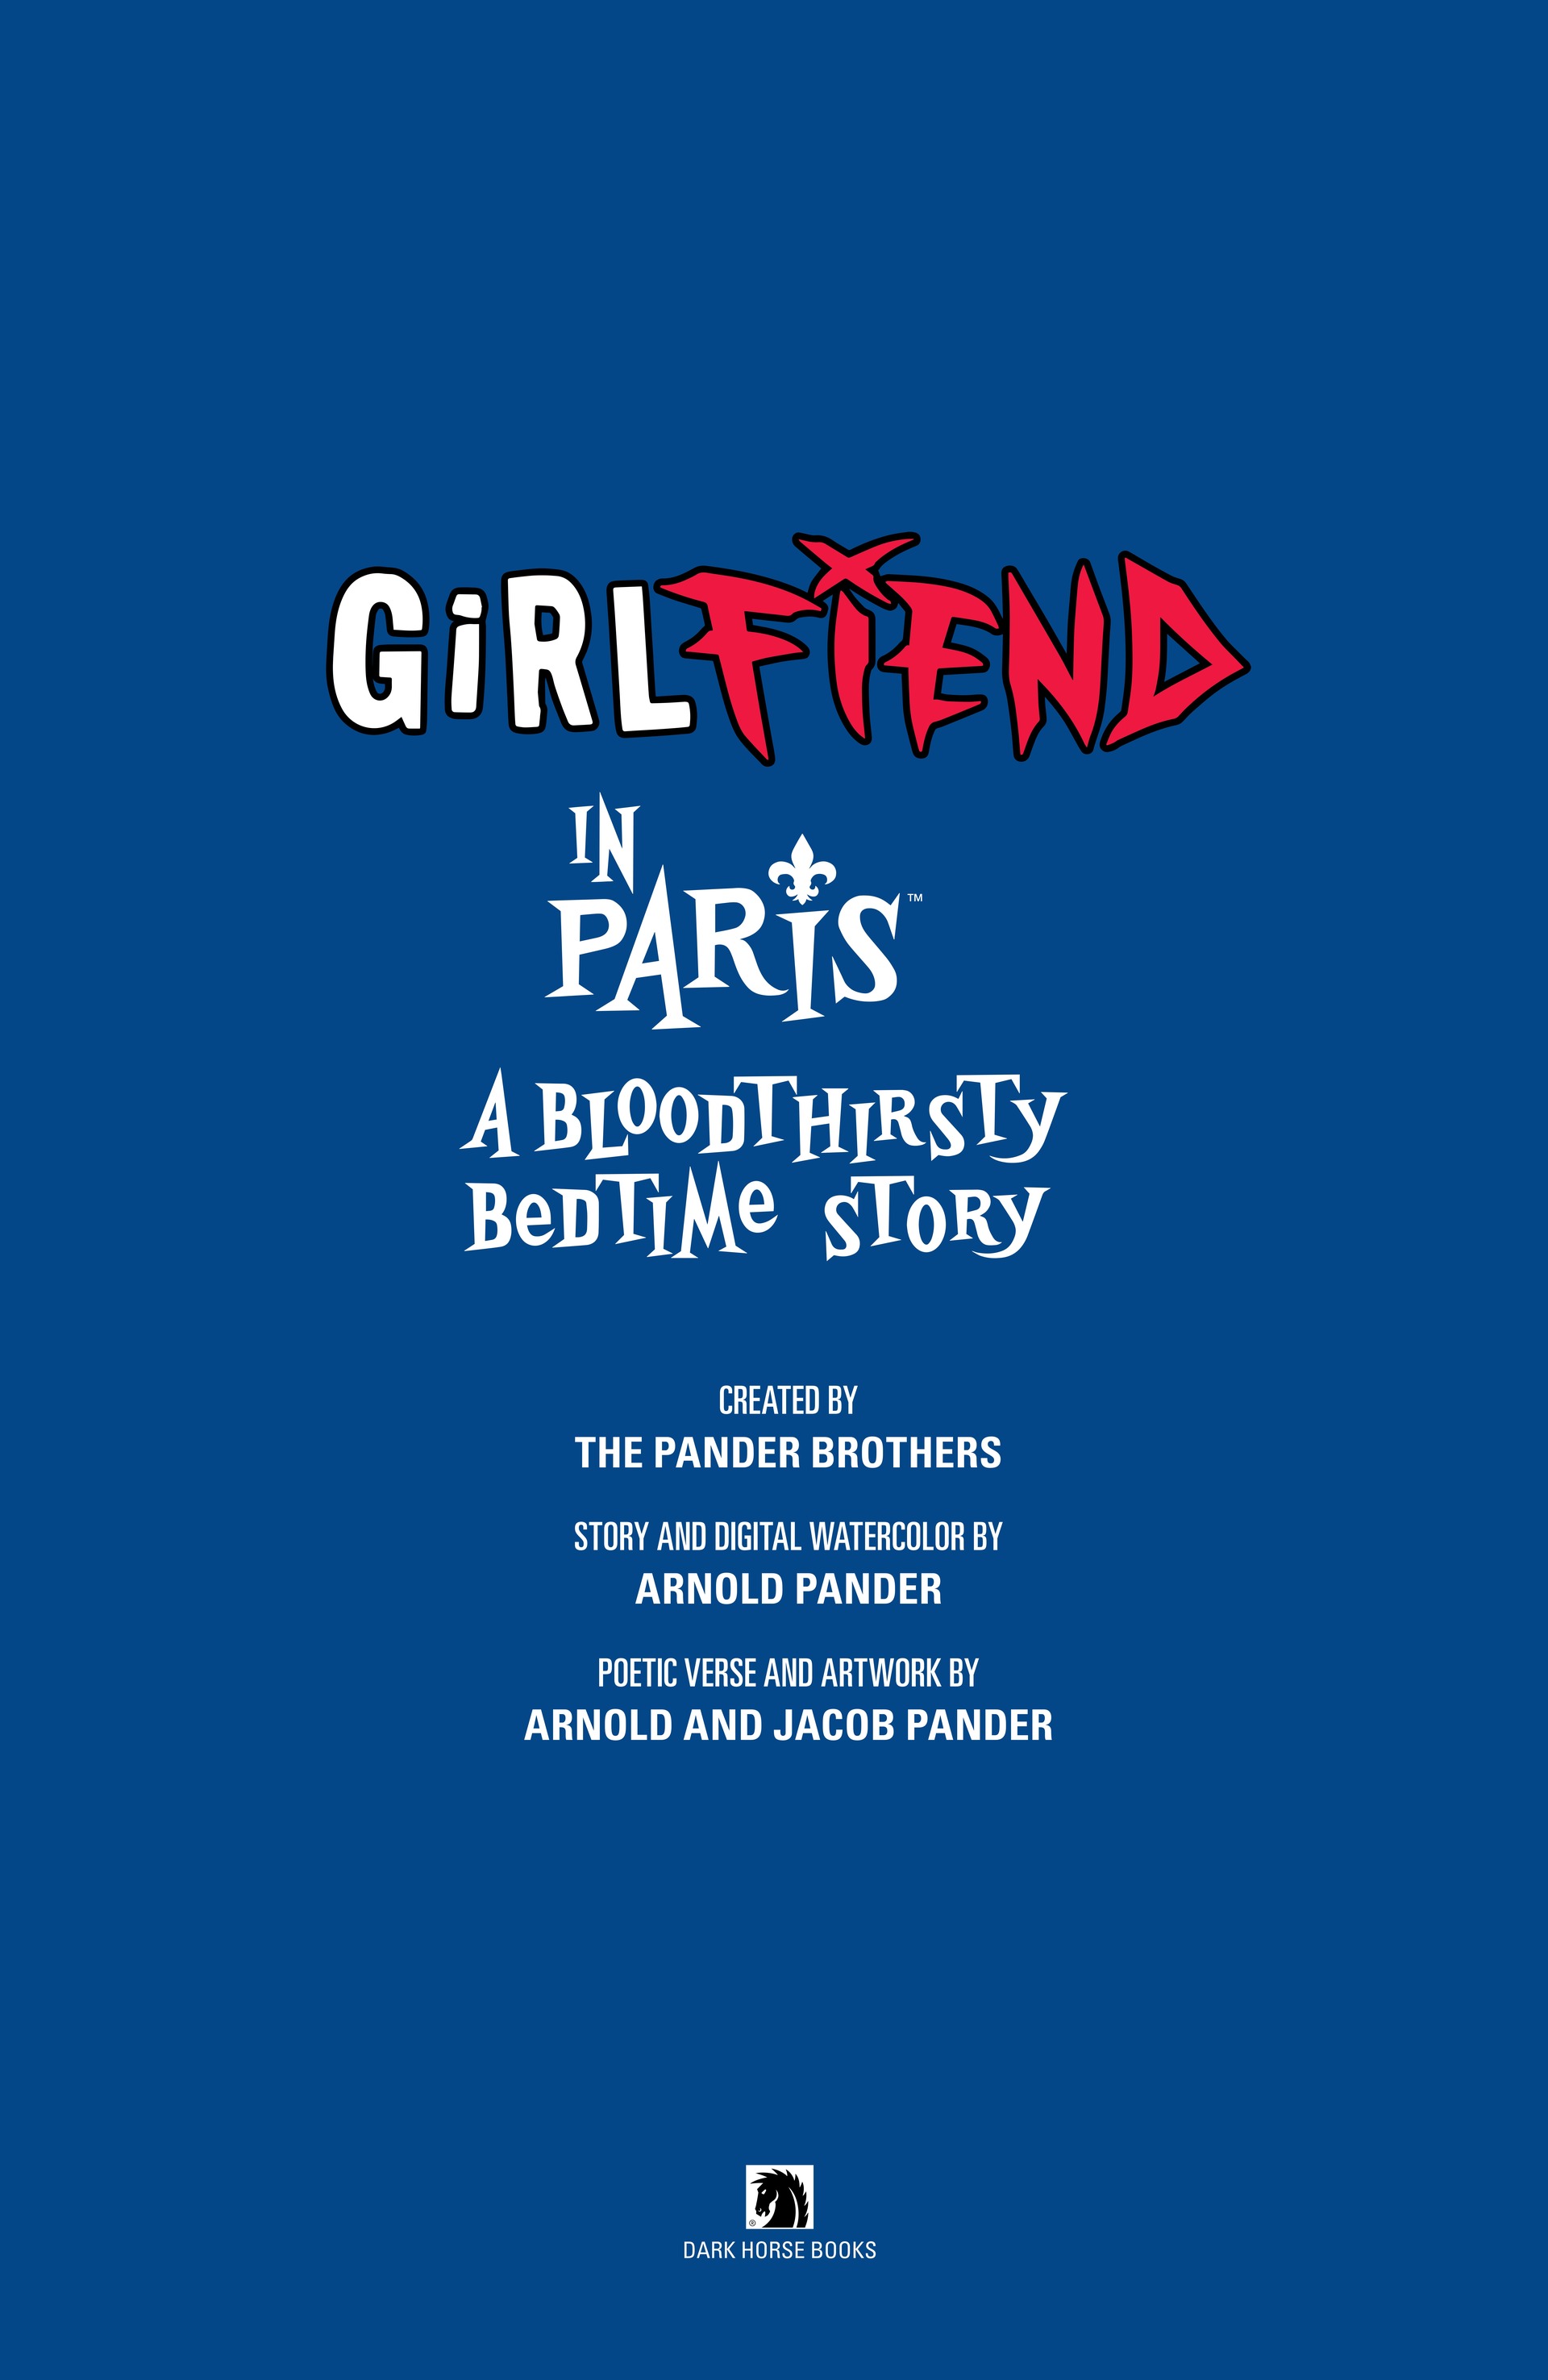 Read online GirlFIEND in Paris: A Bloodthirsty Bedtime Story comic -  Issue # TPB - 6